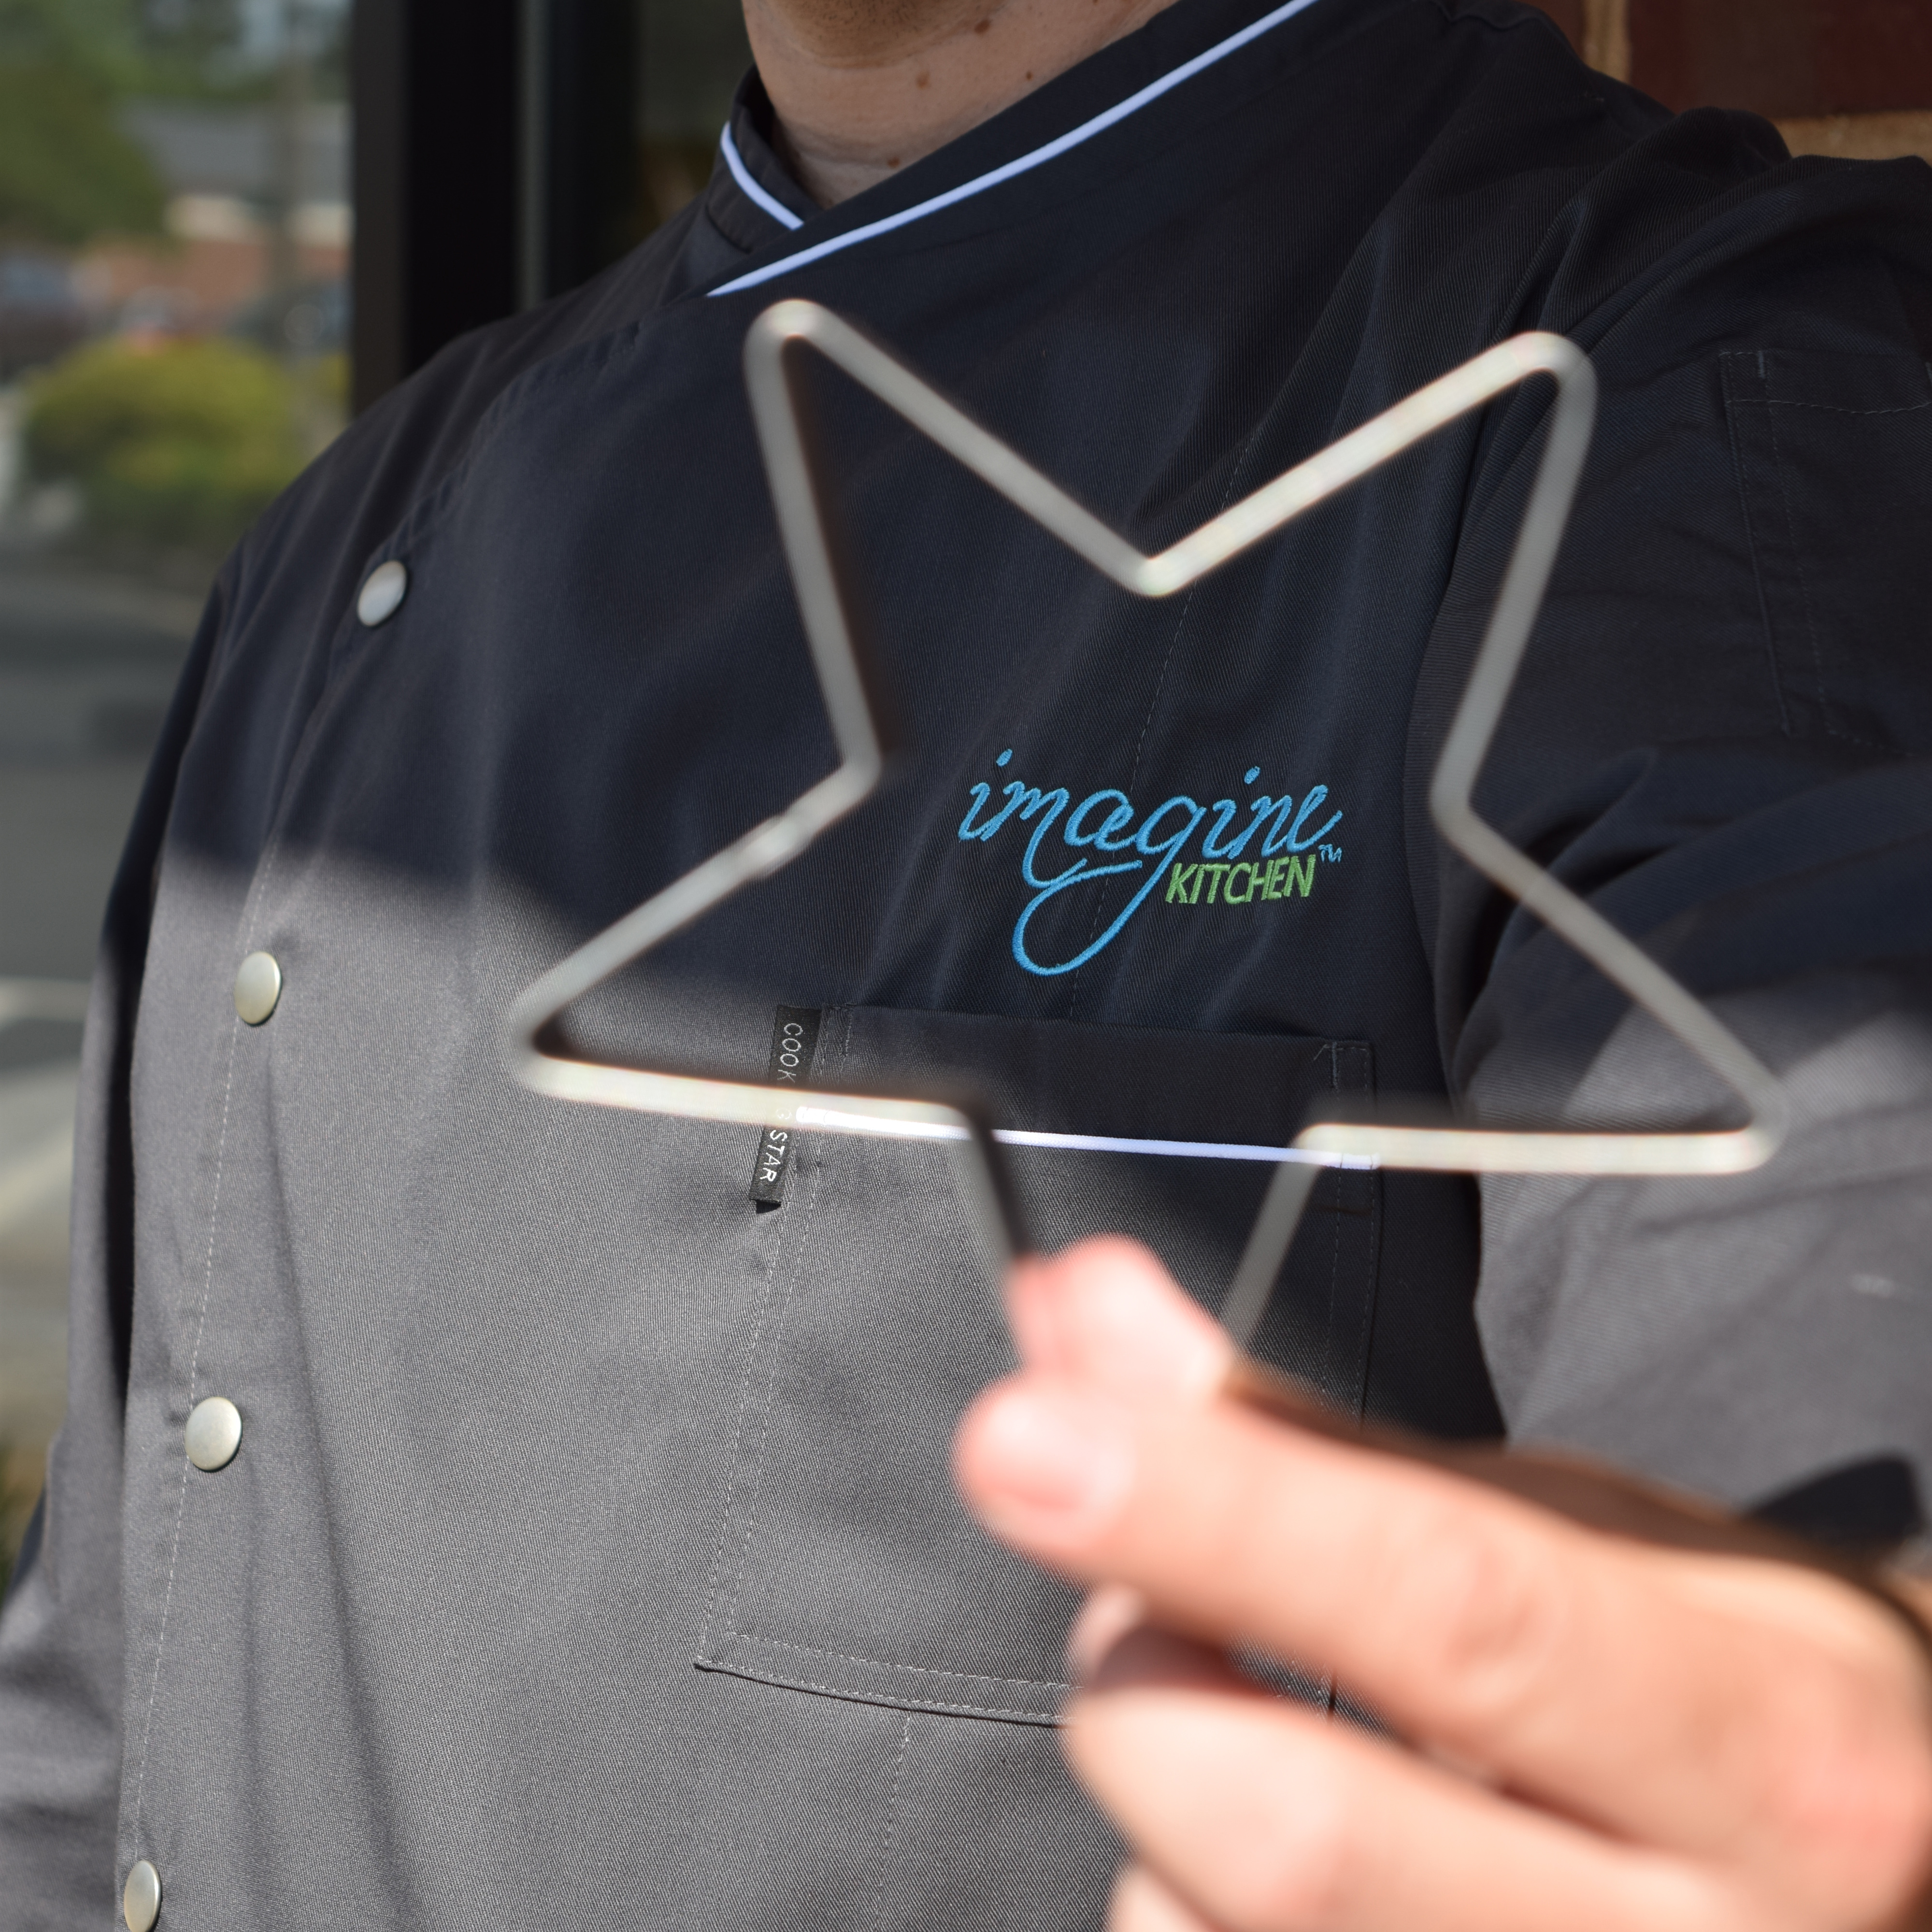 You are the star at Imagine Kitchen!